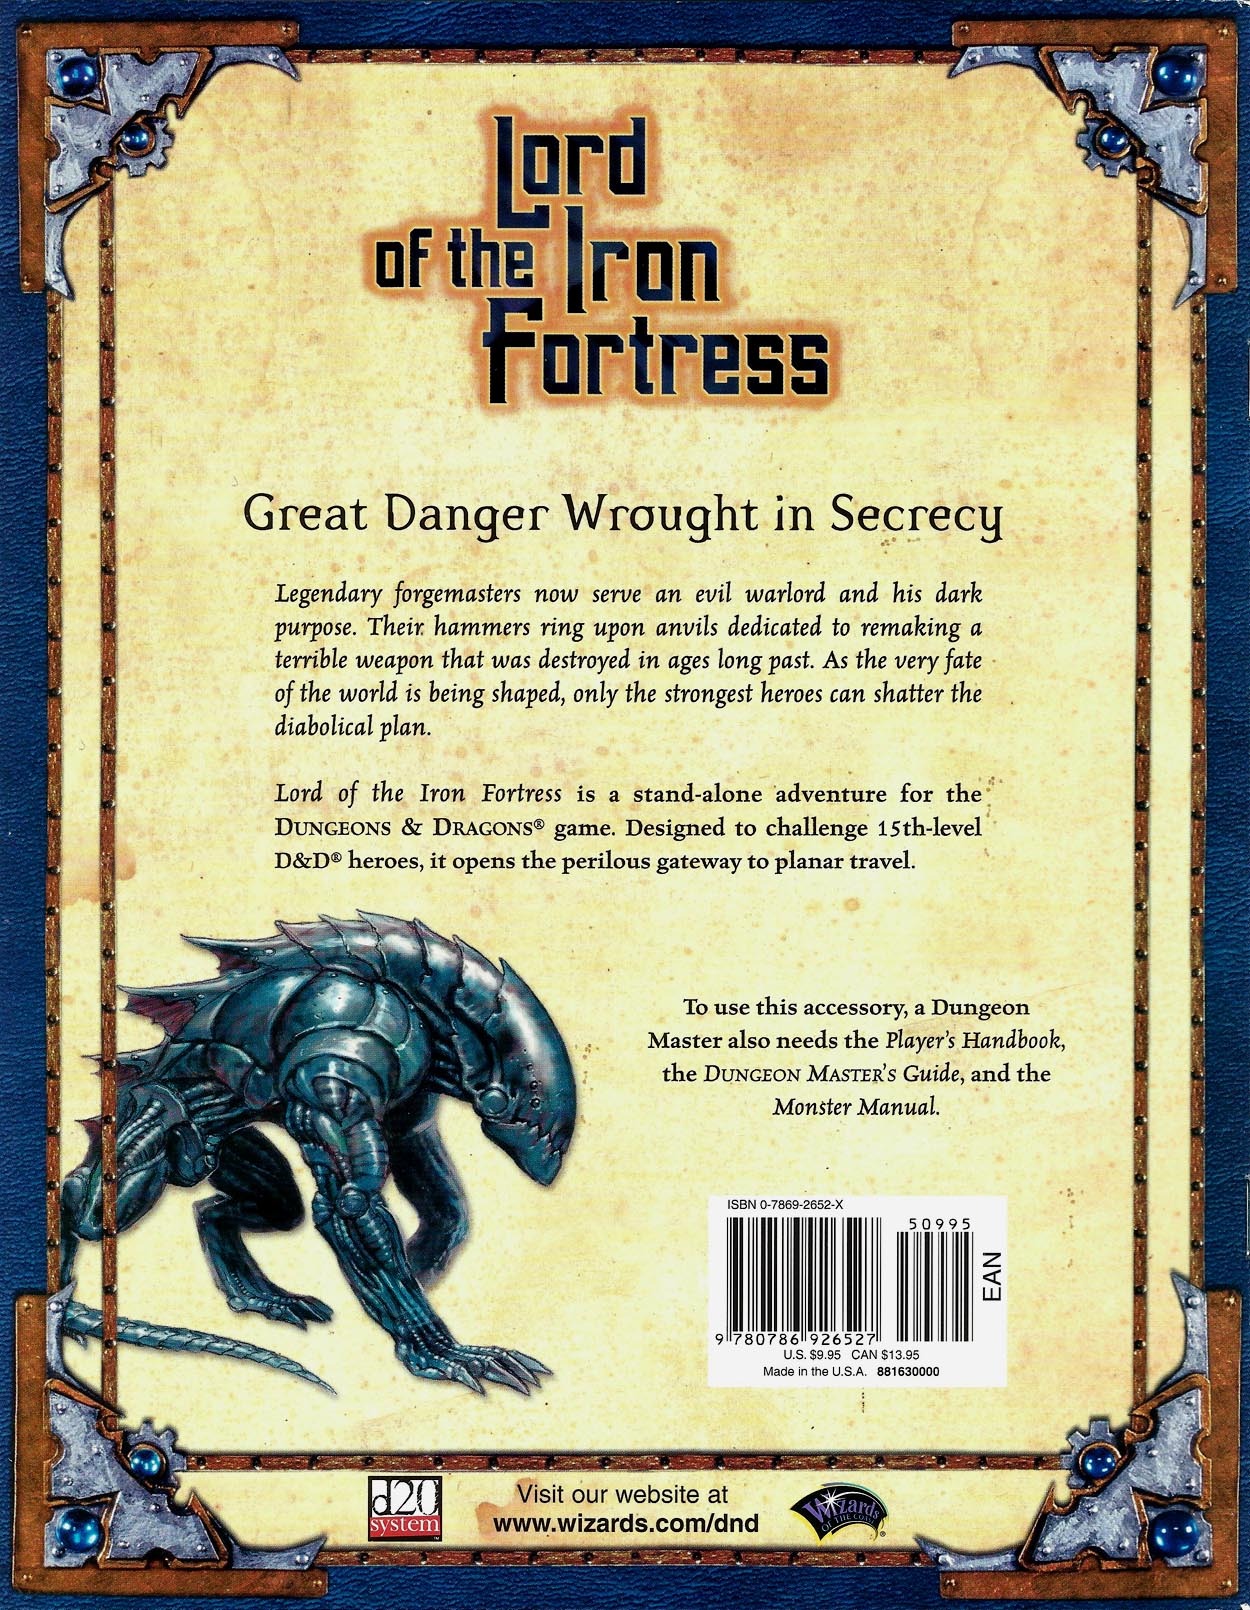 DUNGEONS & DRAGONS - LORD OF THE IRON FORTRESS - 88163 - RPG RELIQUARY